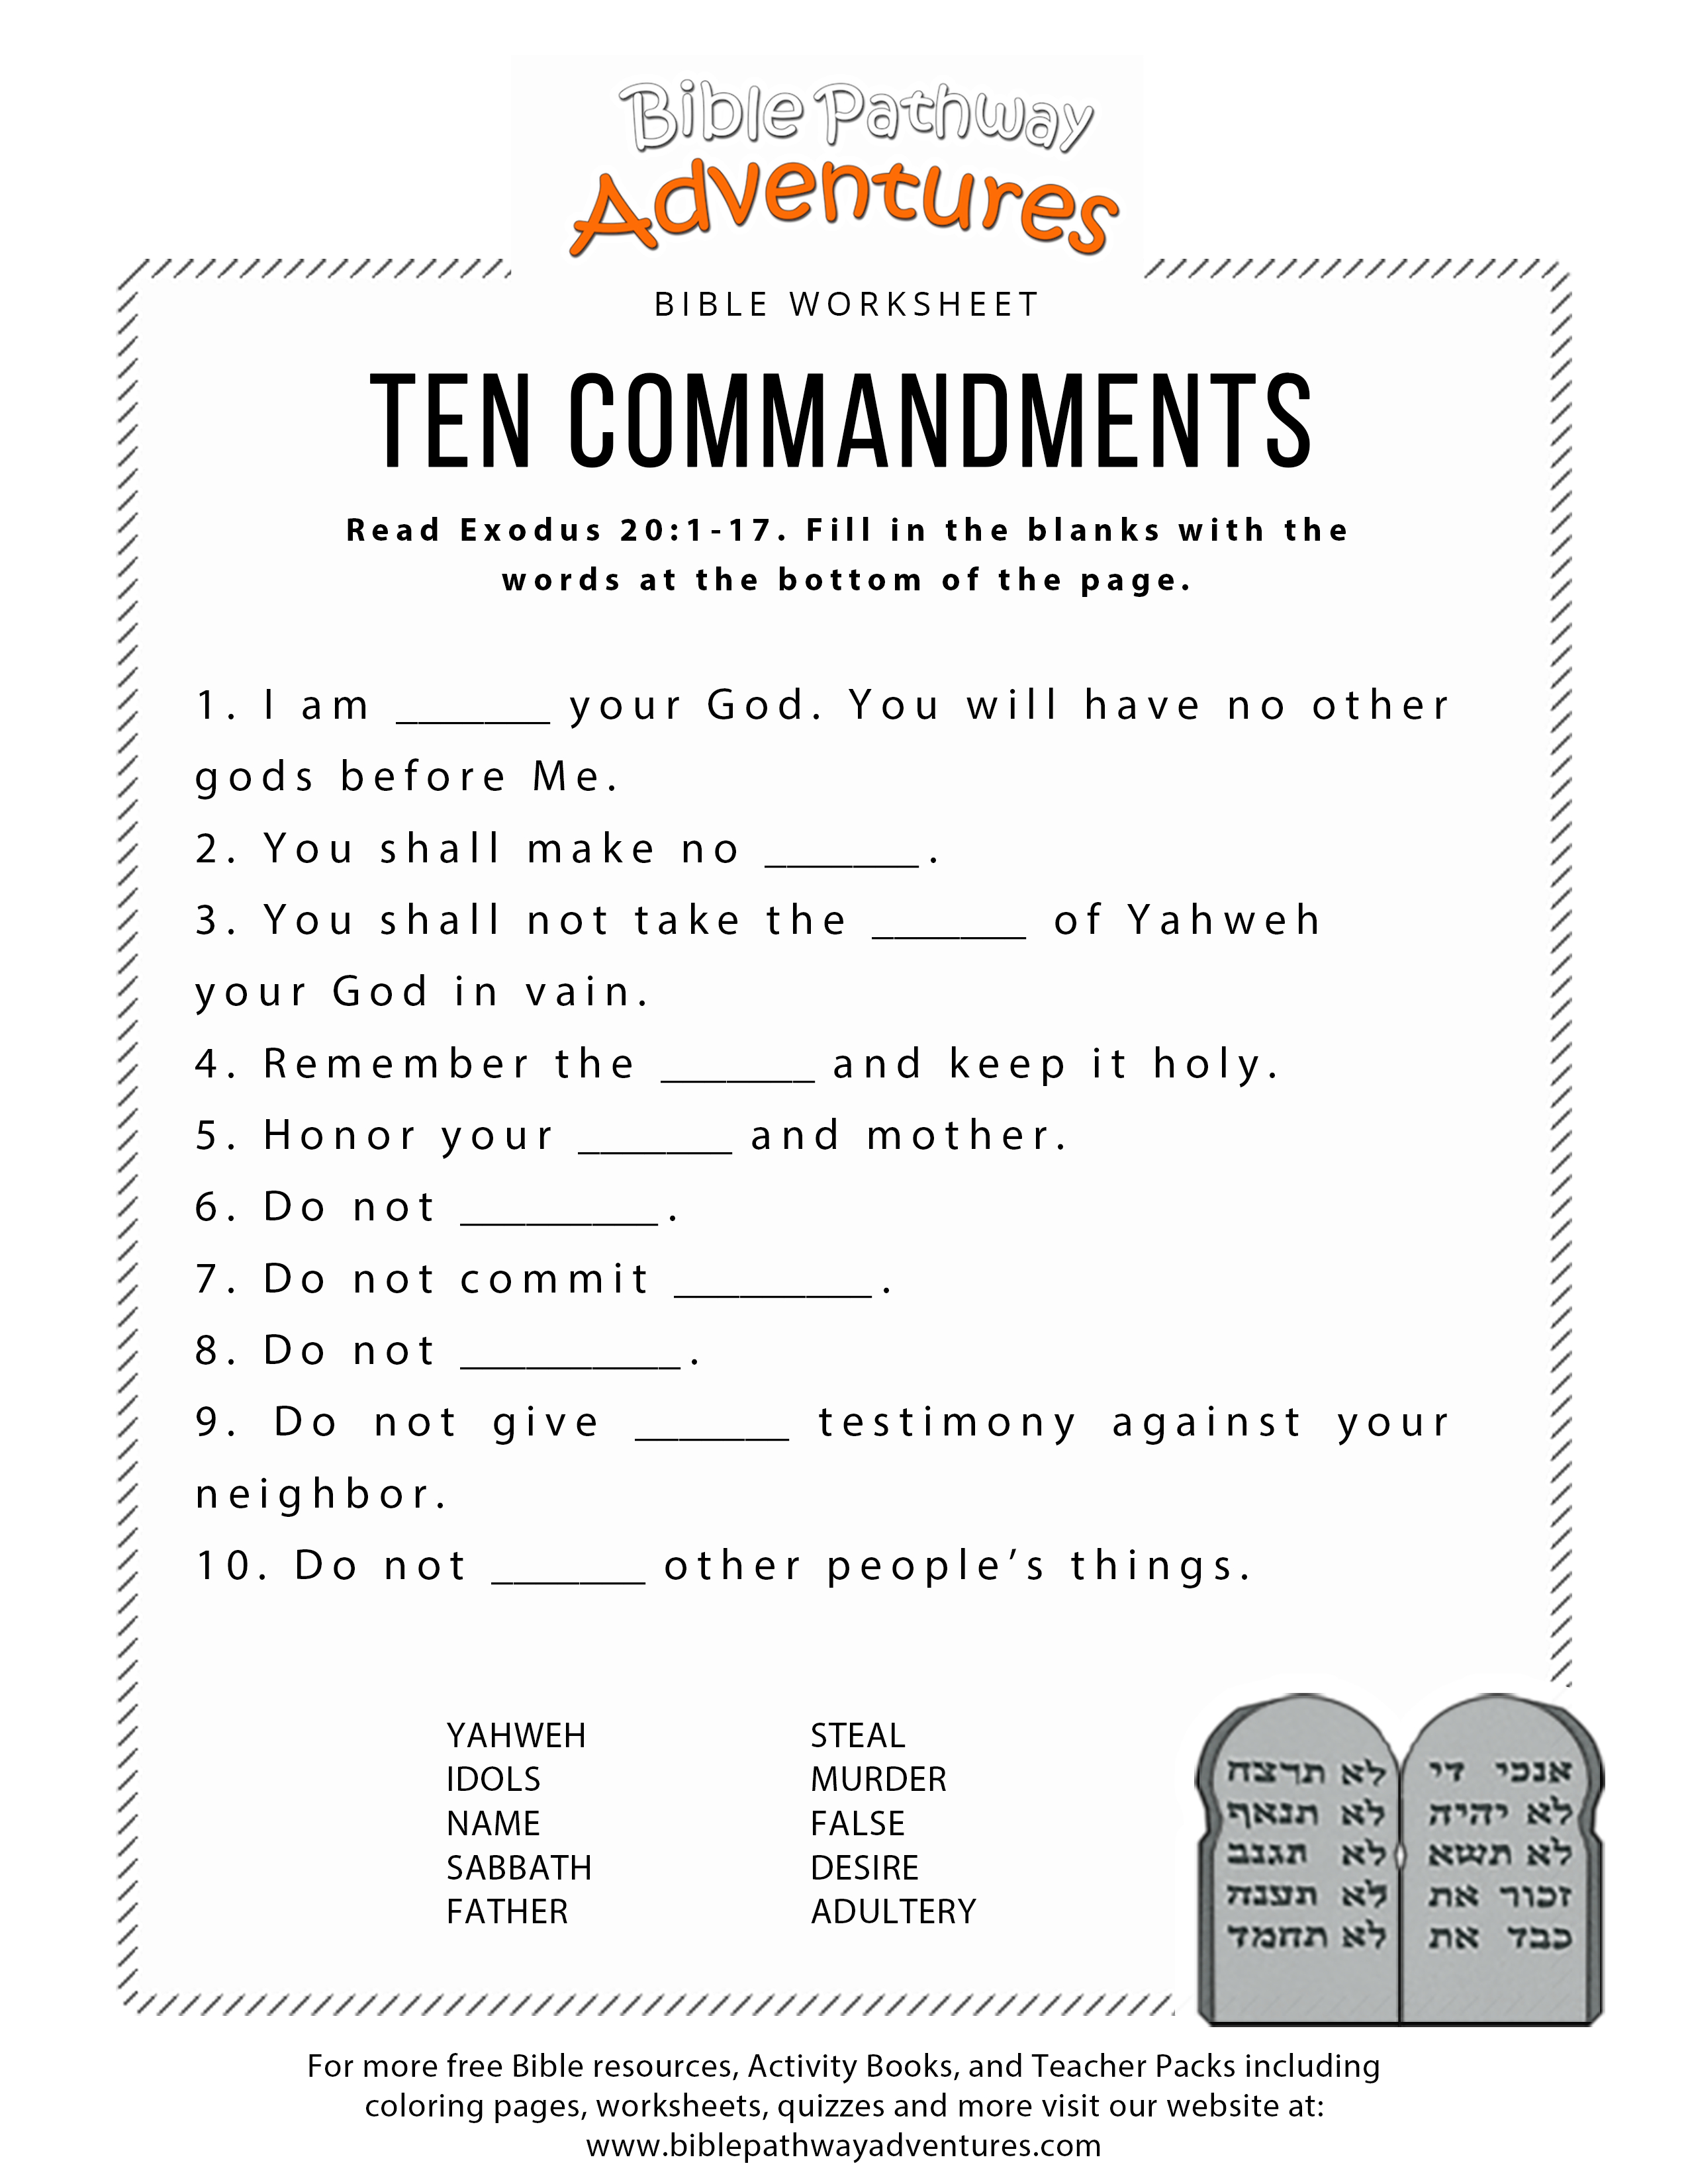 Ten Commandments Worksheet For Kids | Worksheets For Psr | Bible - Free Printable Bible Games For Youth